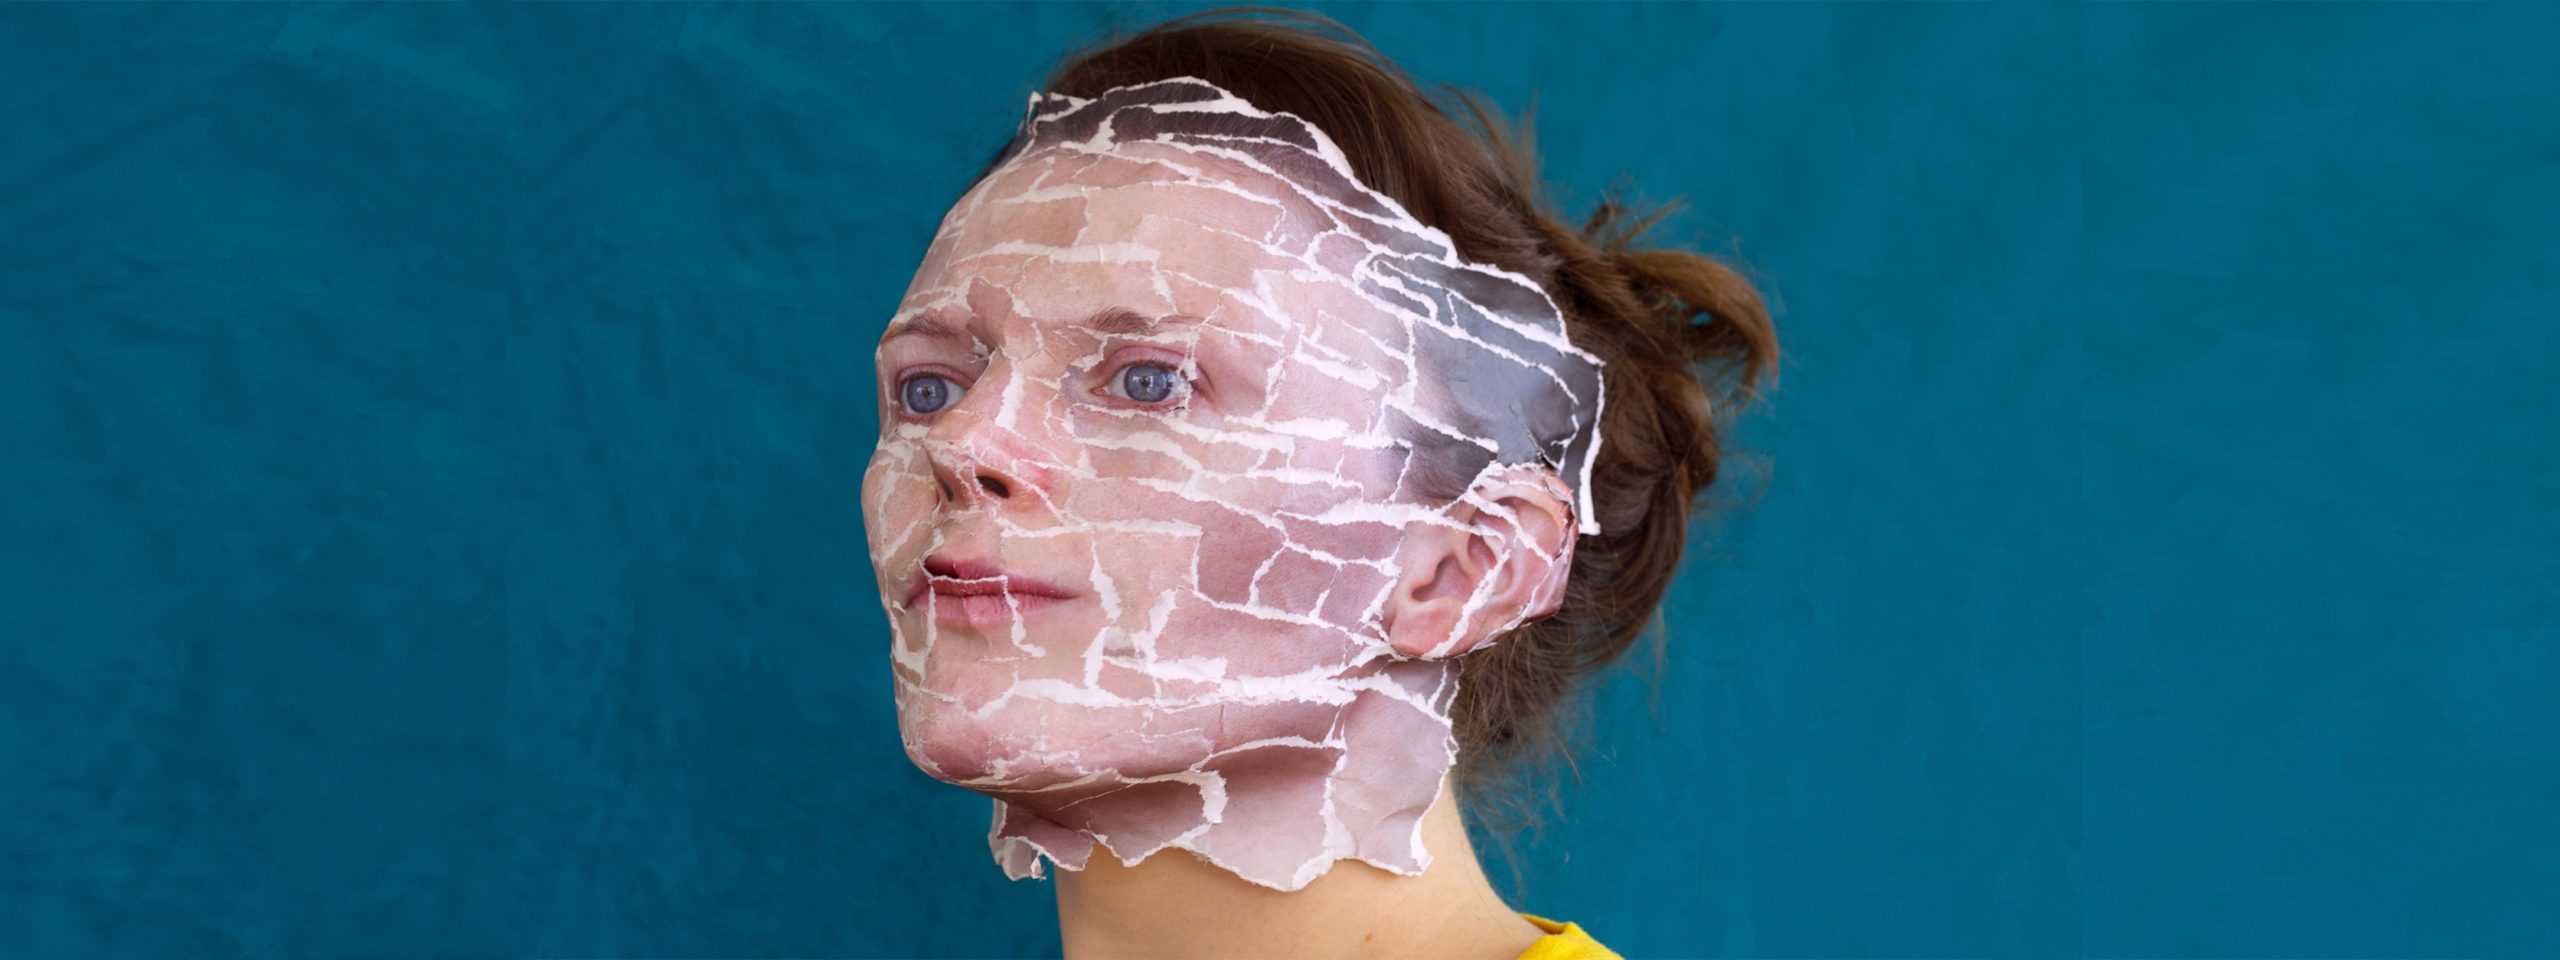 a woman with a plastic covering her face.